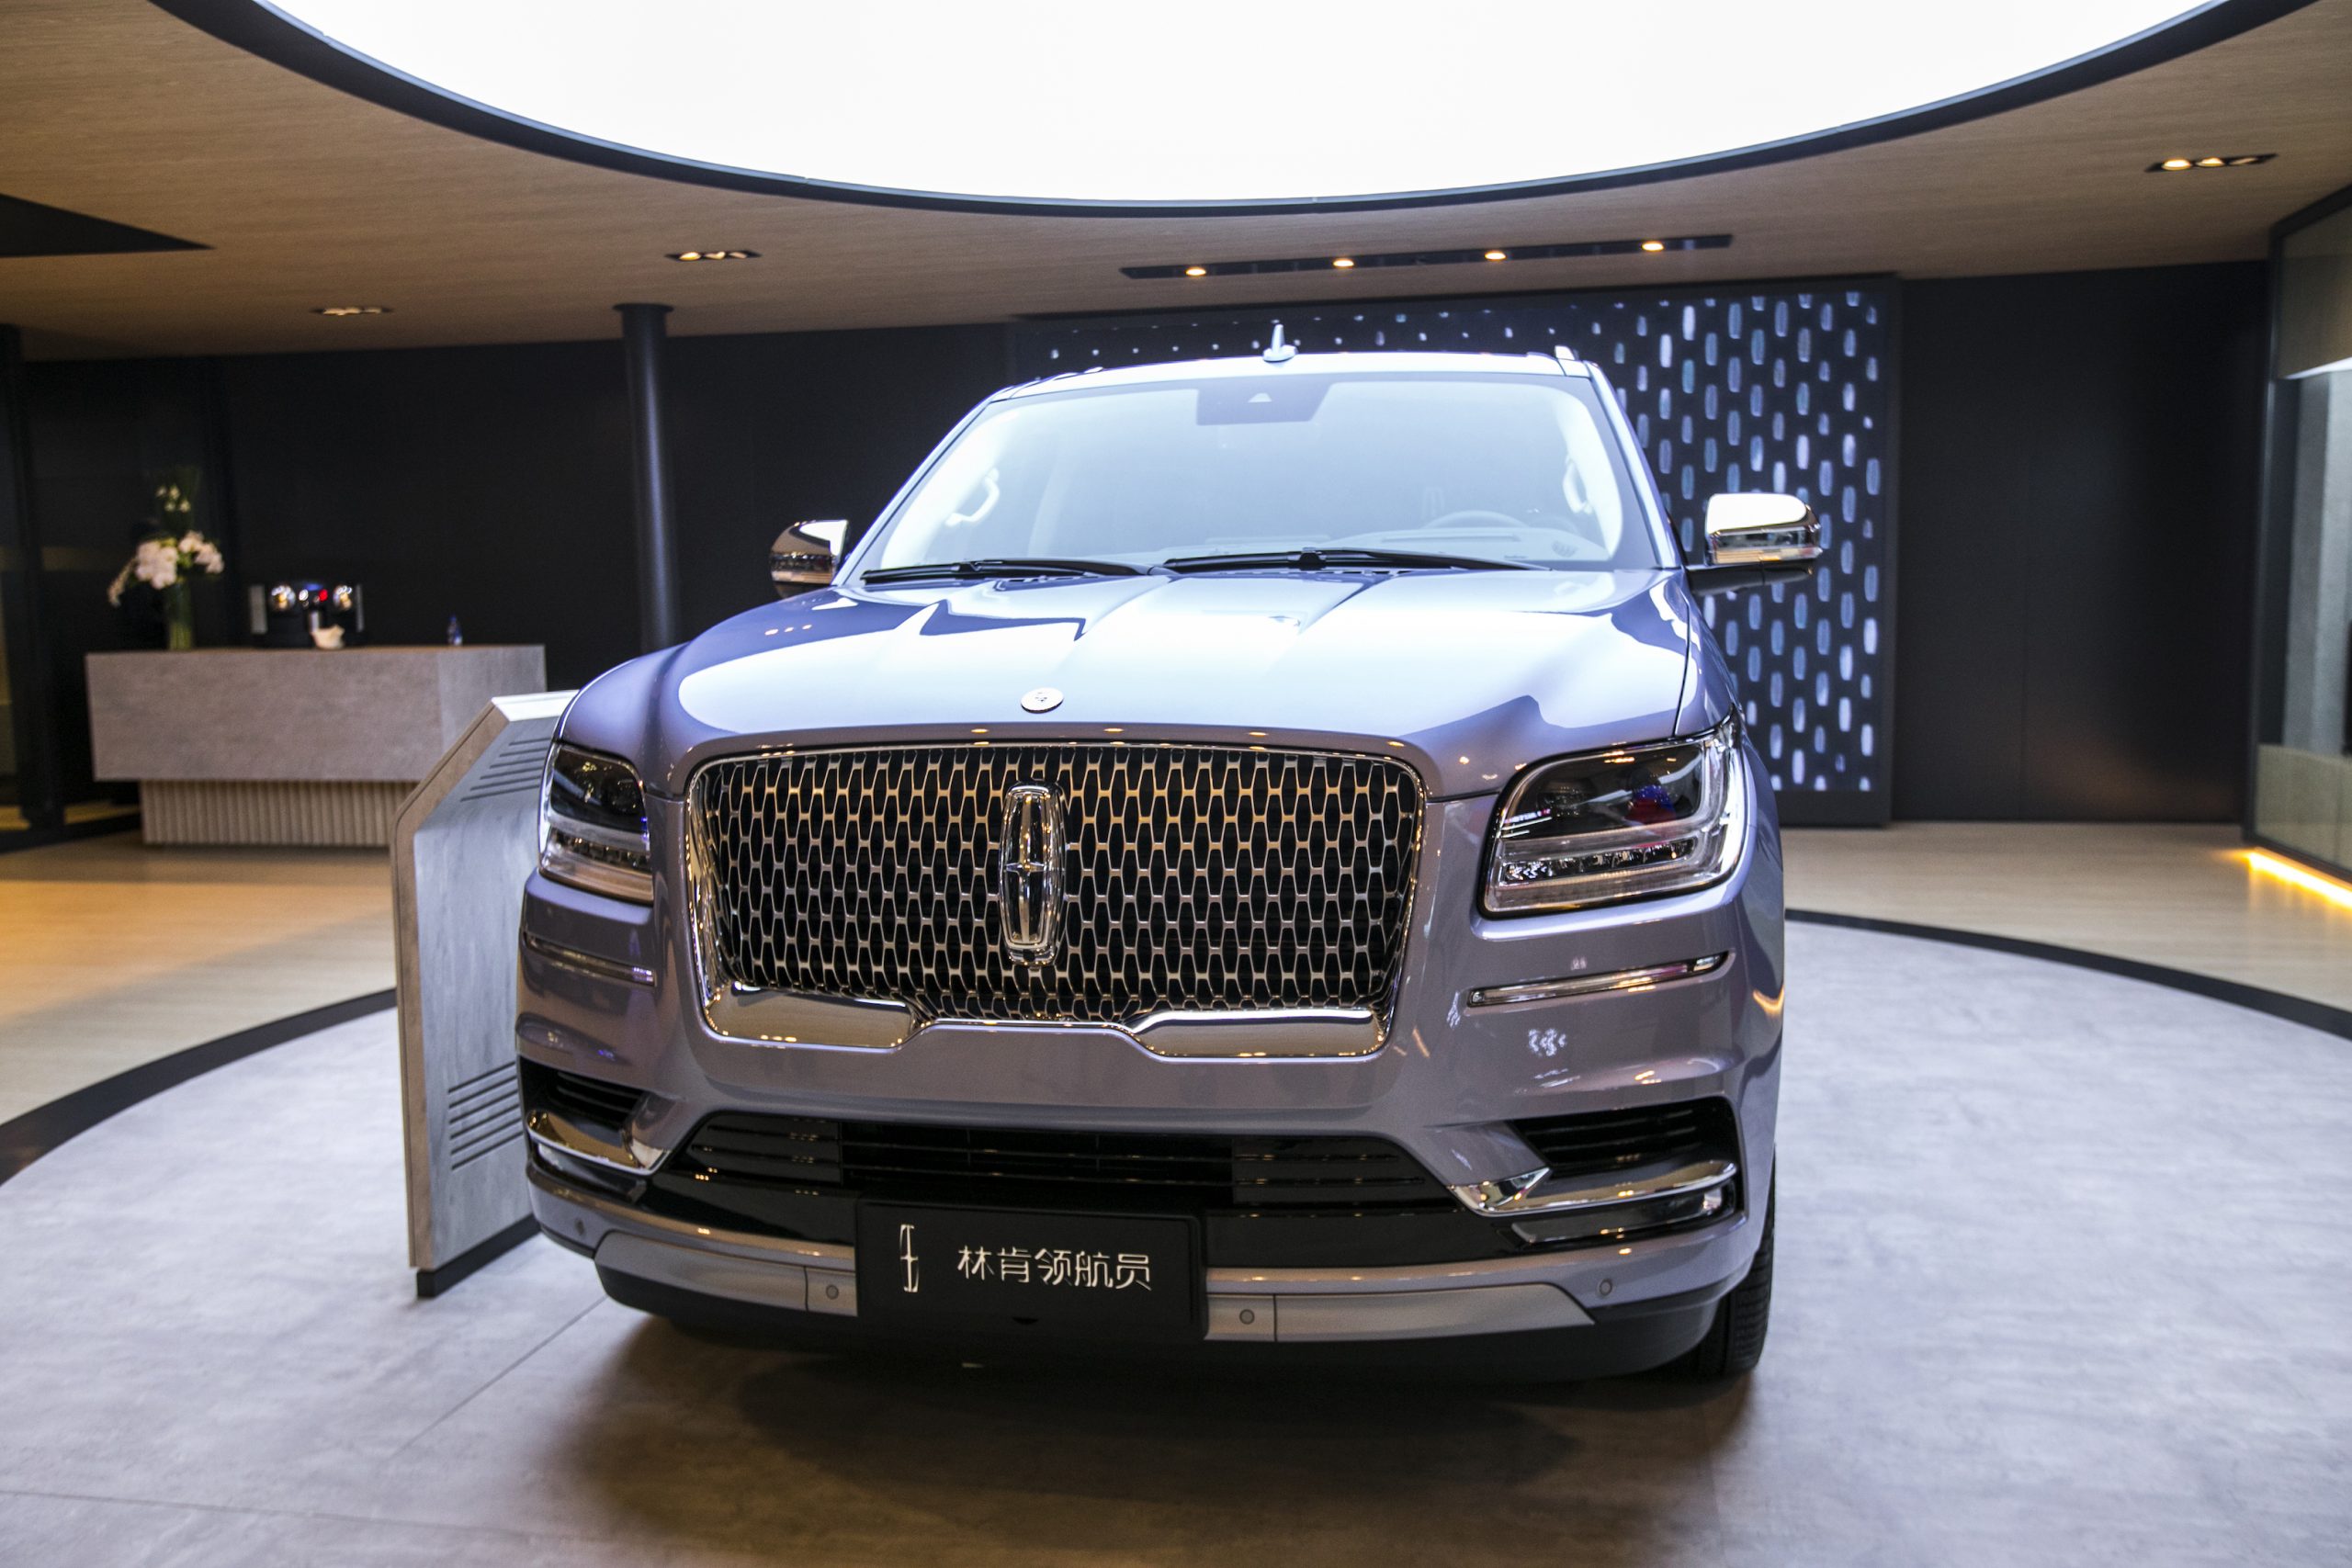 A silver Lincoln Navigator car is on display during the 19th Shanghai International Automobile Industry Exhibition (Auto Shanghai 2021) at National Exhibition and Convention Center